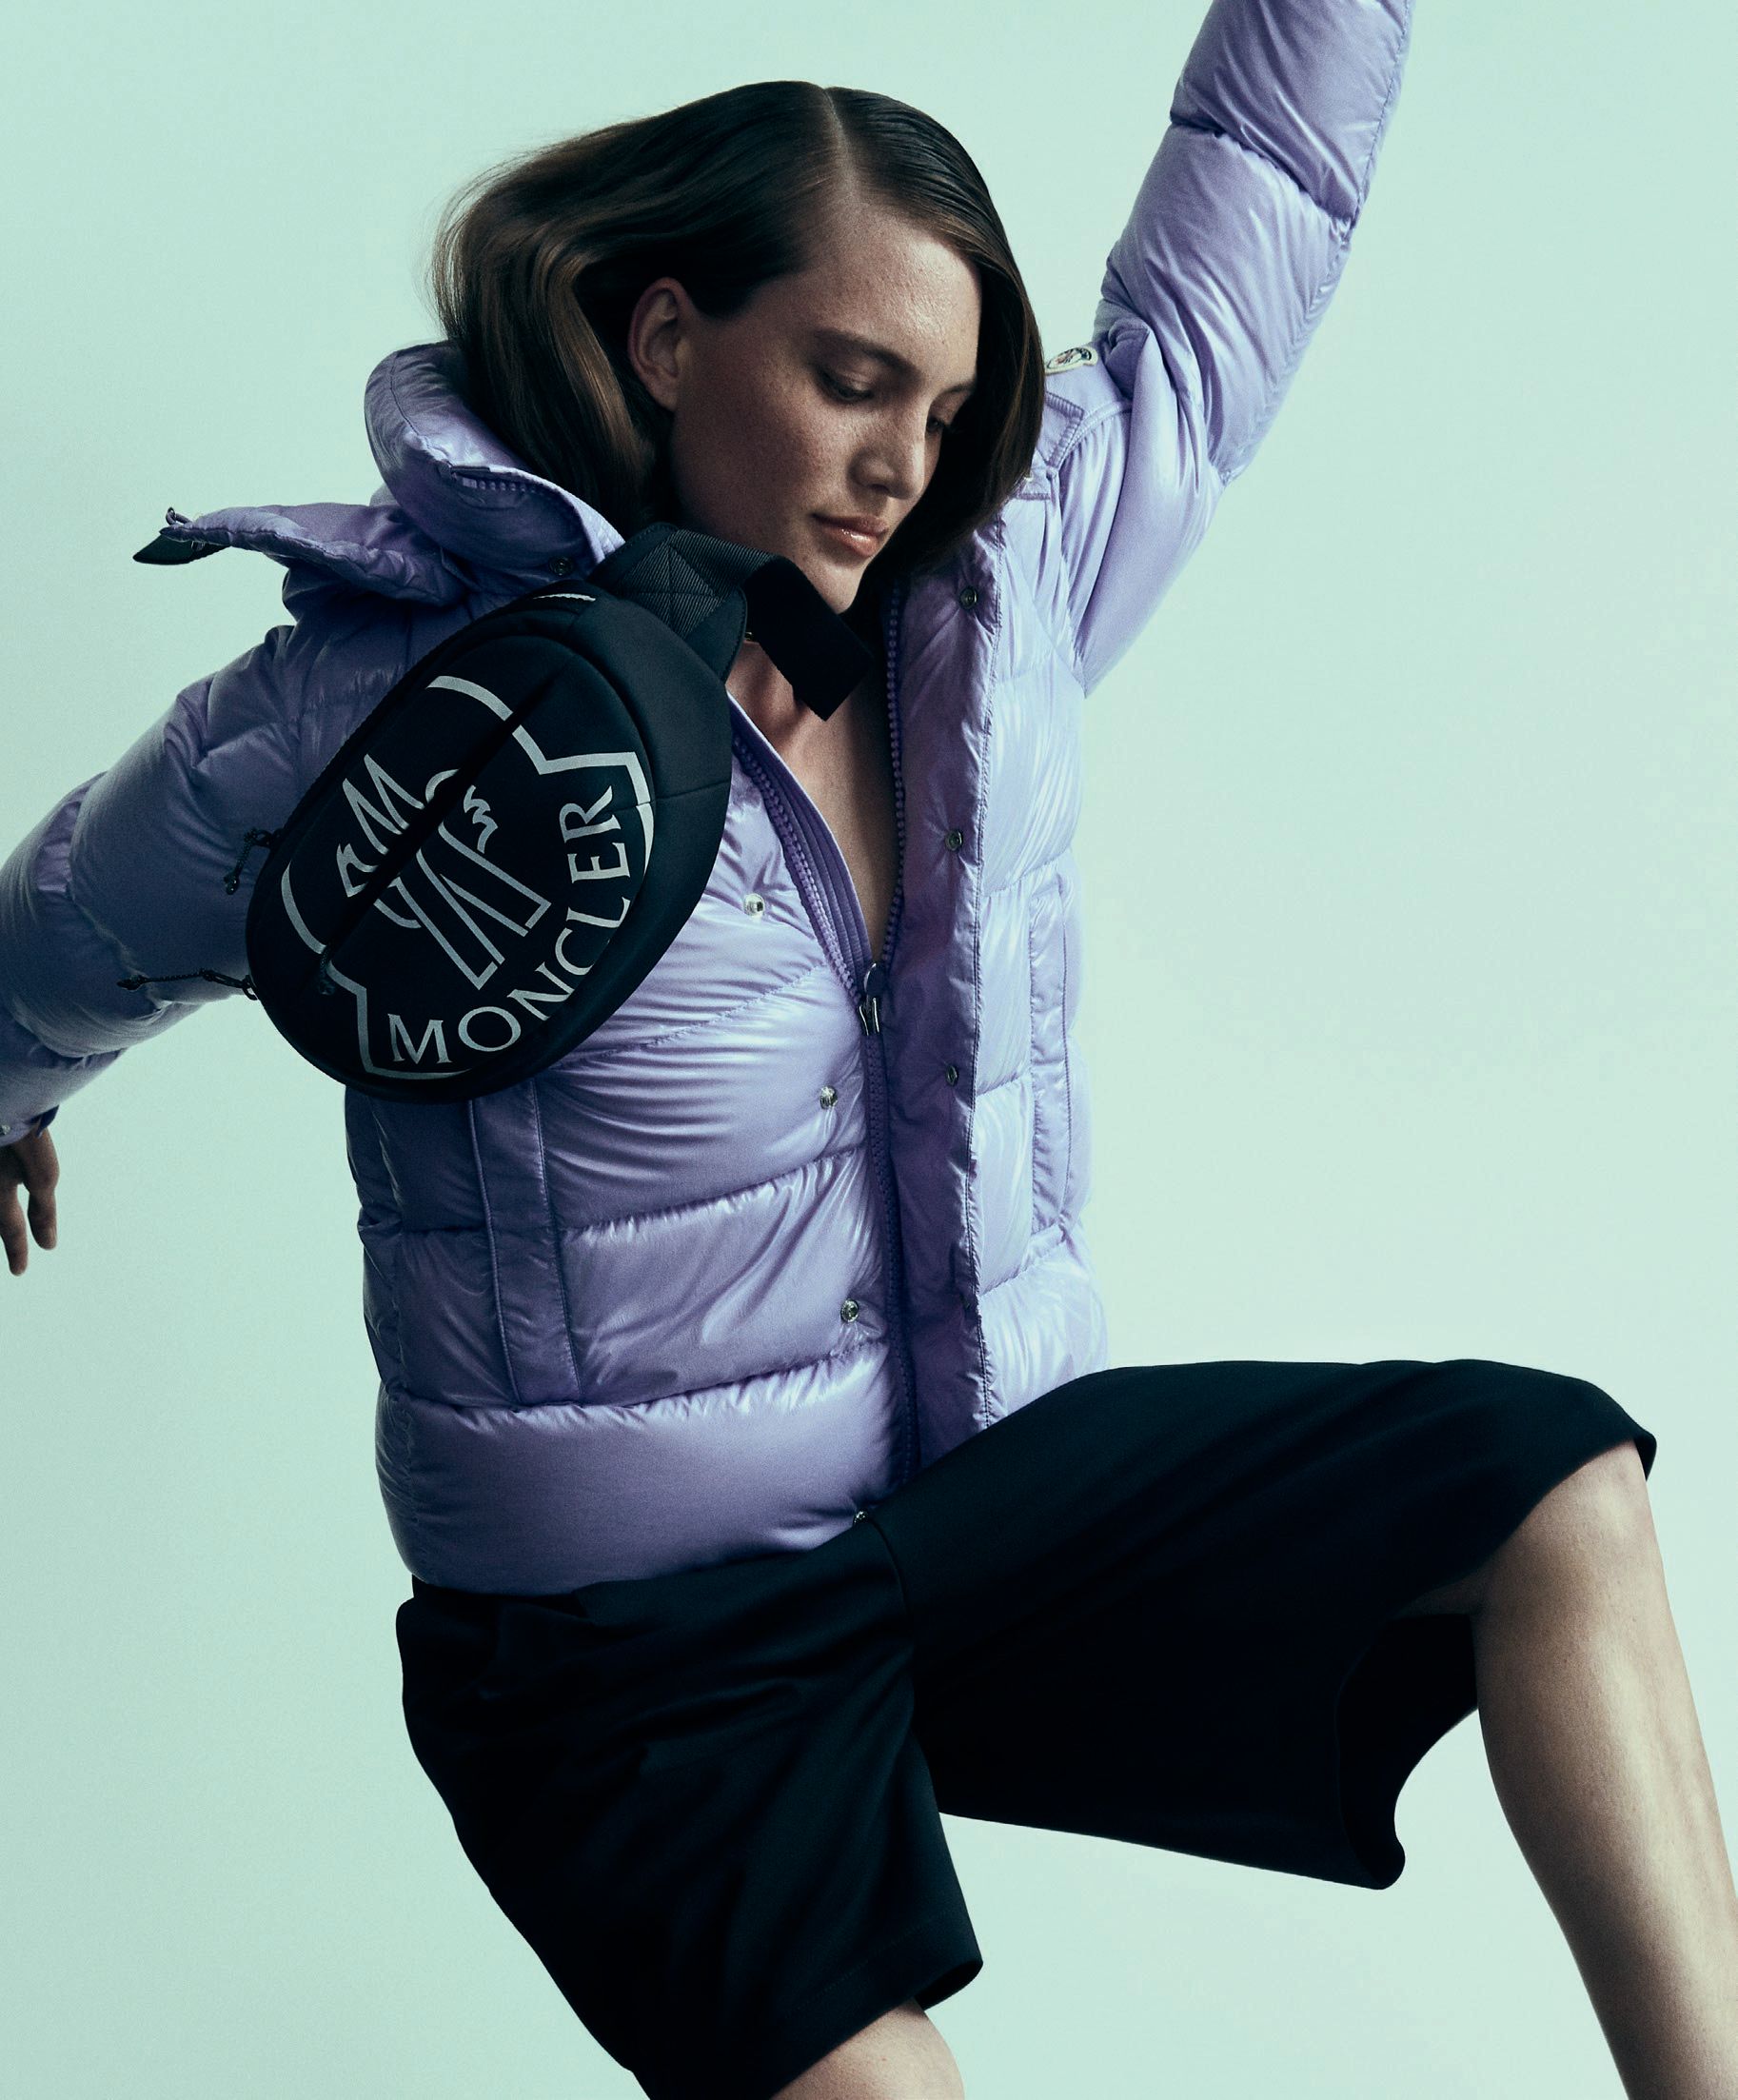 Moncler Maya 70 down jacket in Wild Lavender with nylon shorts and maxi logo nylon belt bag, moncler.com. Photographed by Yossi Michaeli Styled by Faye Power Vande Vrede